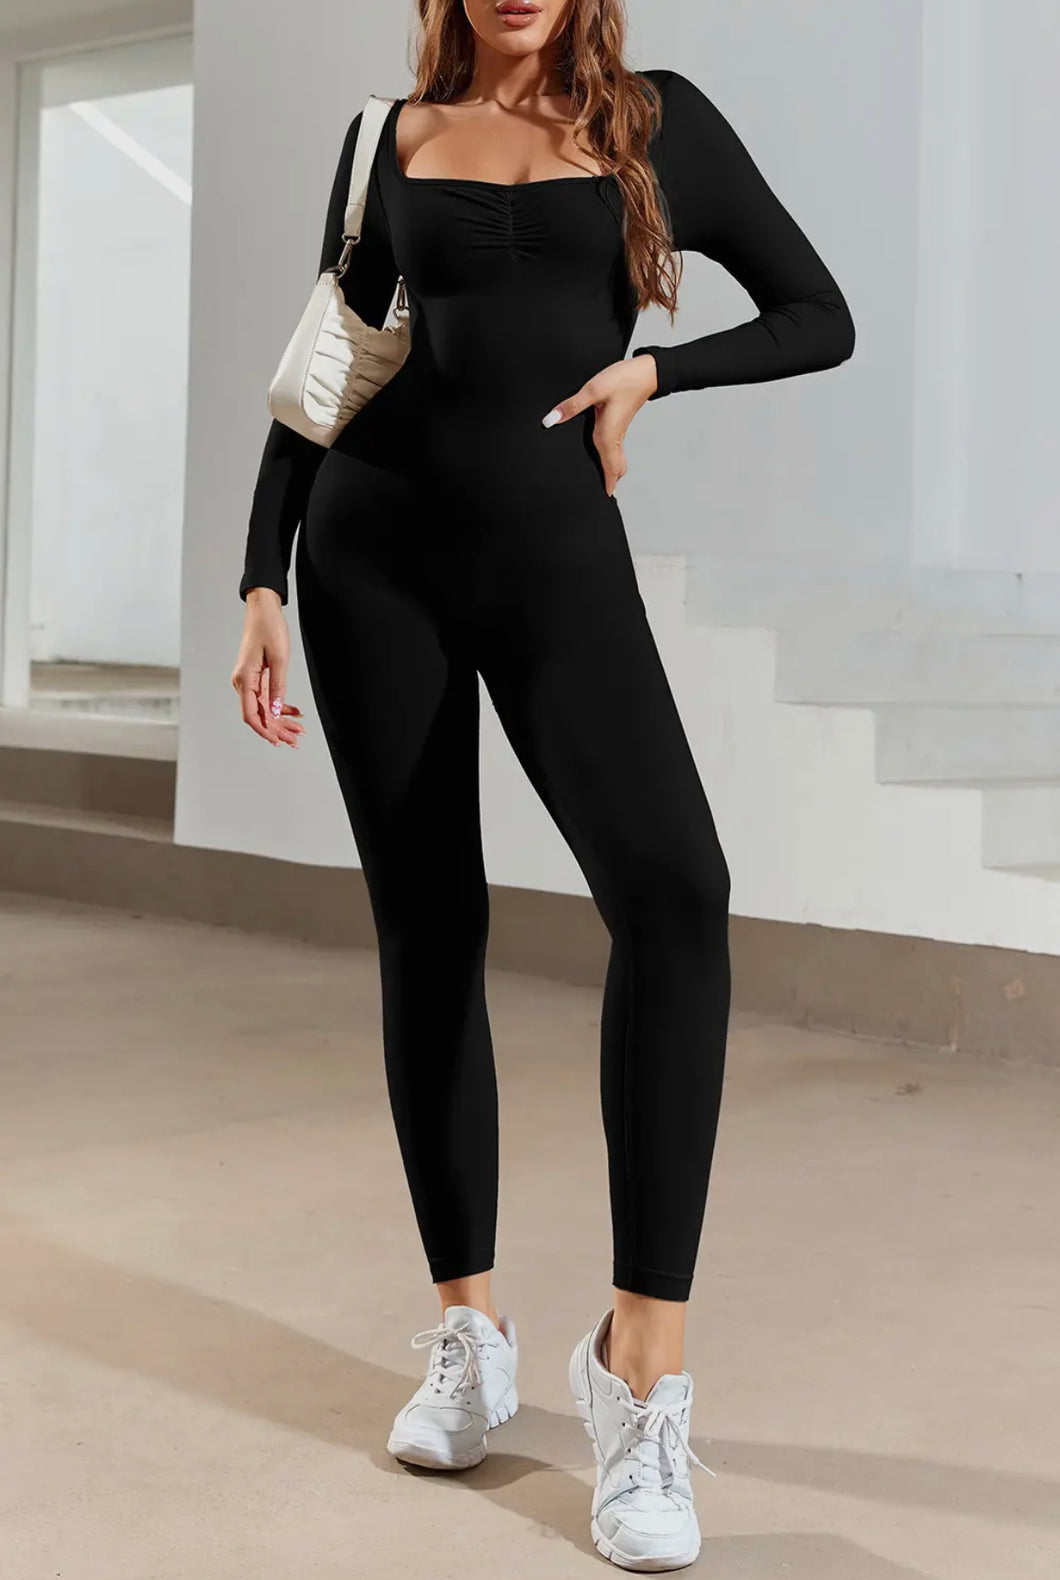 Black Ruched Catsuit